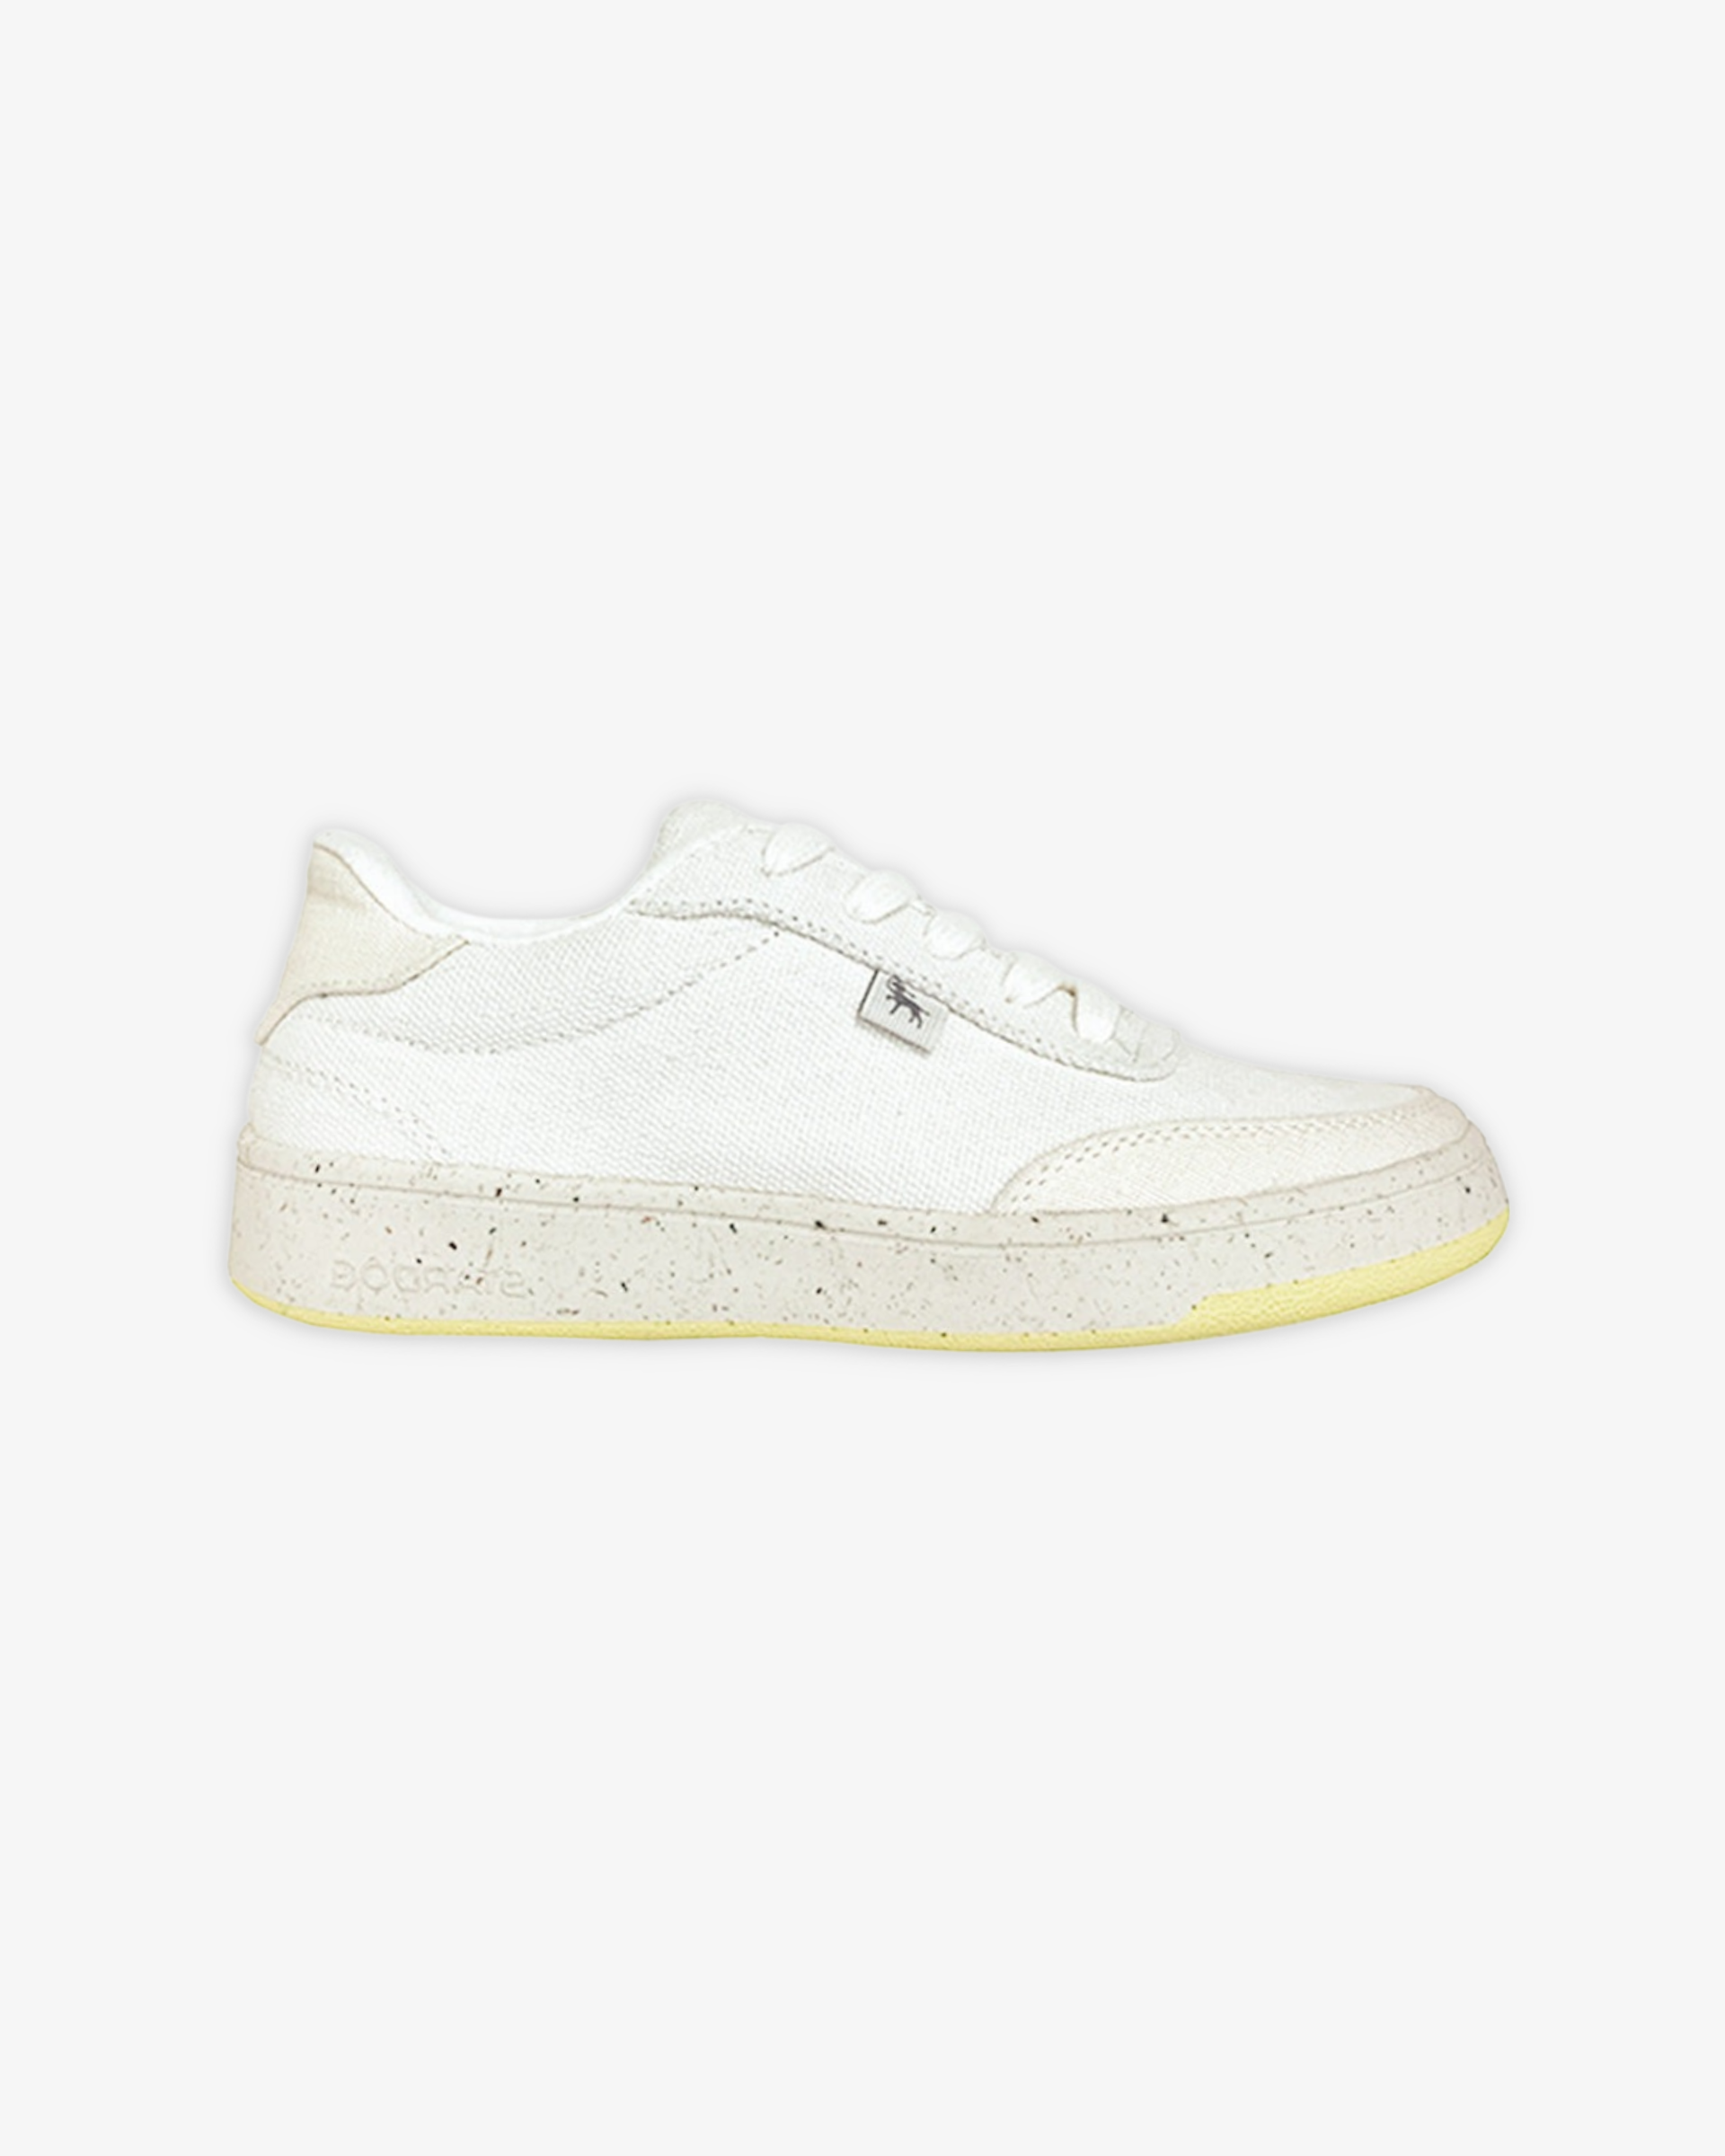 HEMP WOMEN'S ENERGY SNEAKERS - WHITE AND NATURAL (WOMAN)